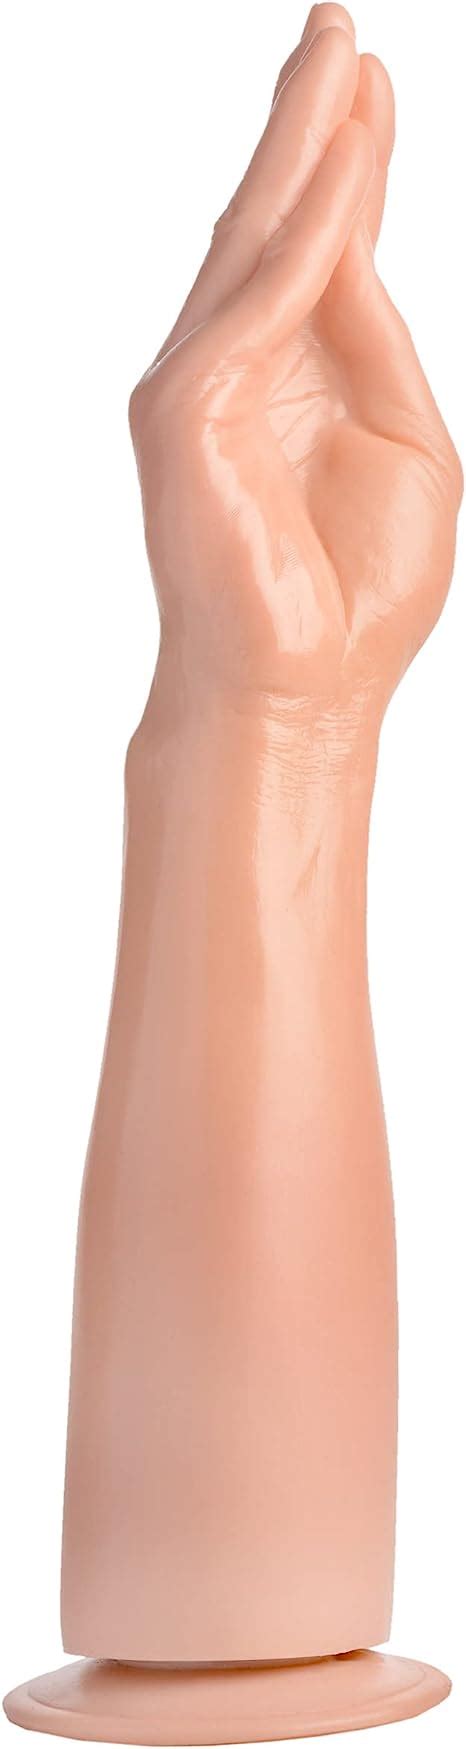 Amazon The Fister Hand And Forearm Dildo Master Series